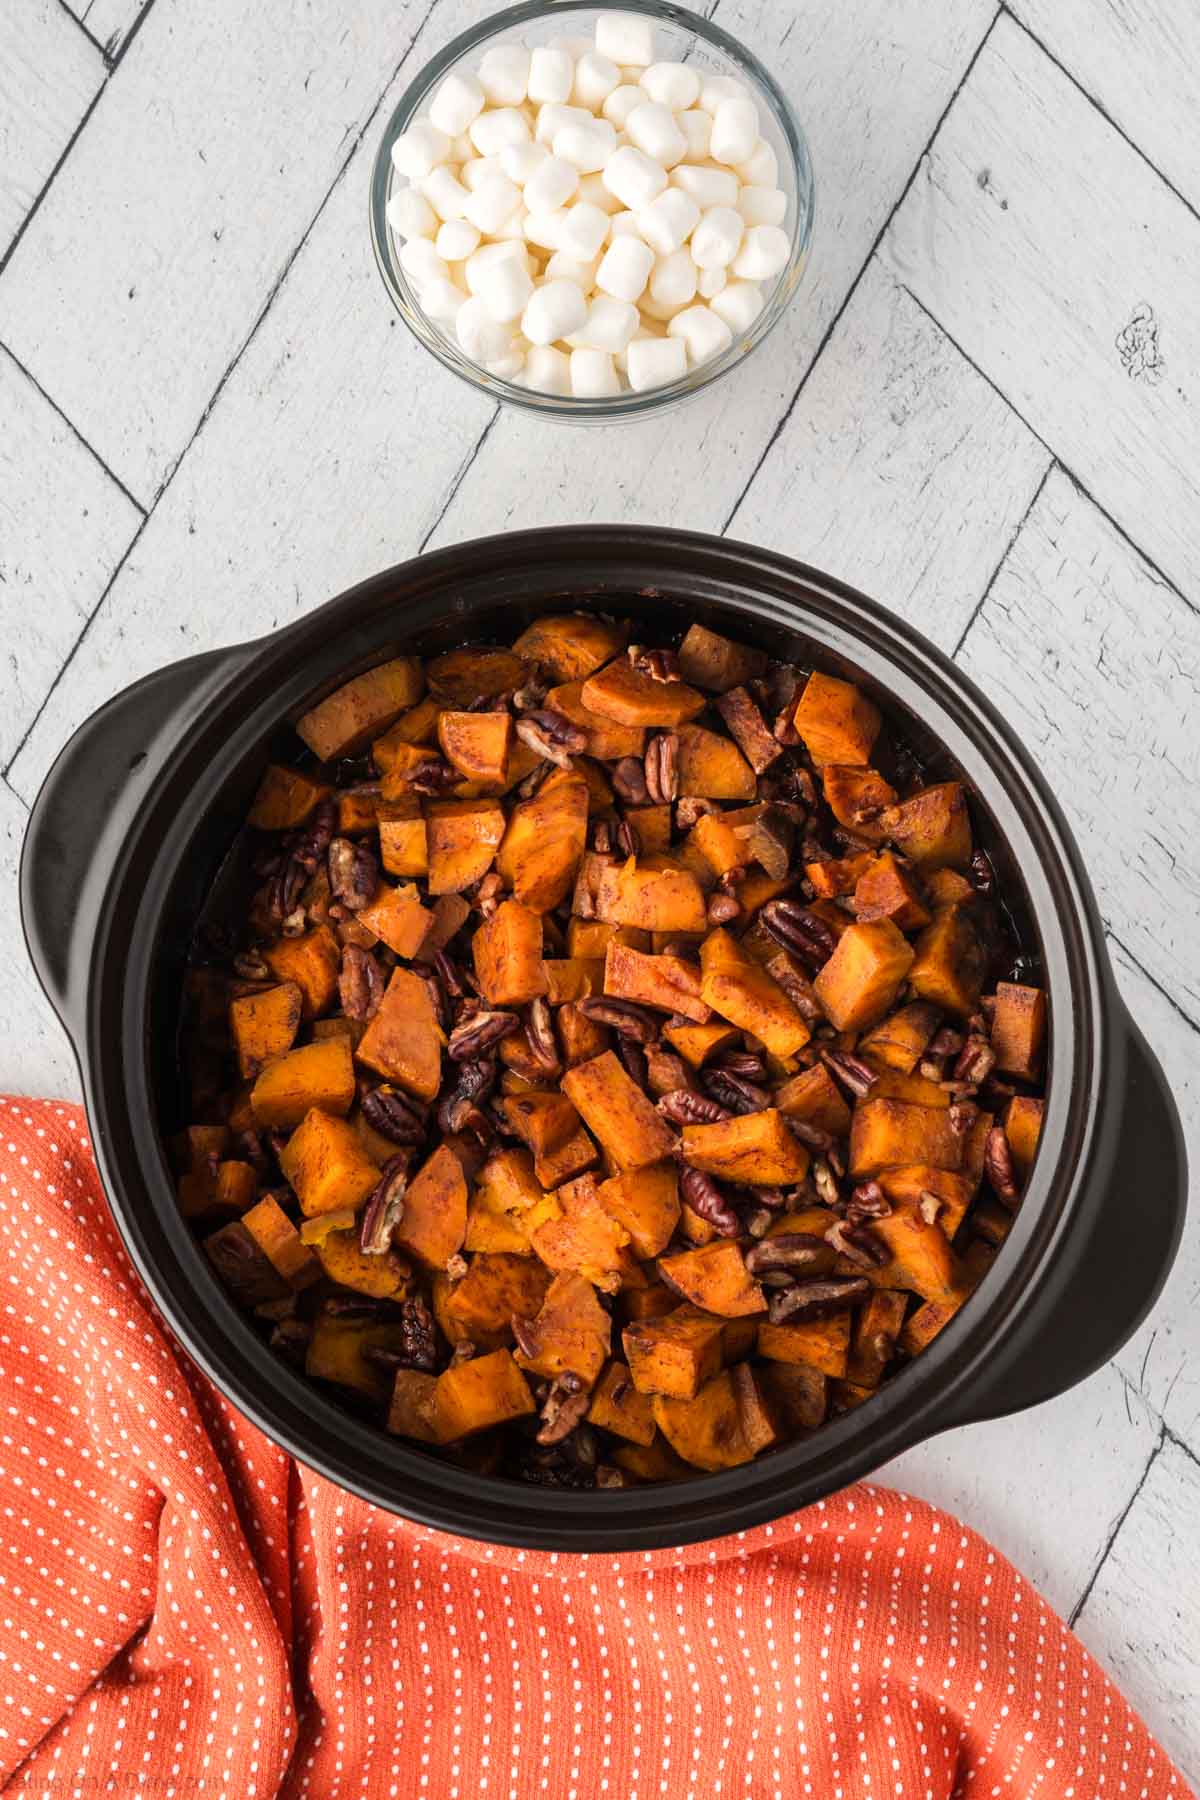 The sweet potatoes and pecans cooked in a cock pot.  